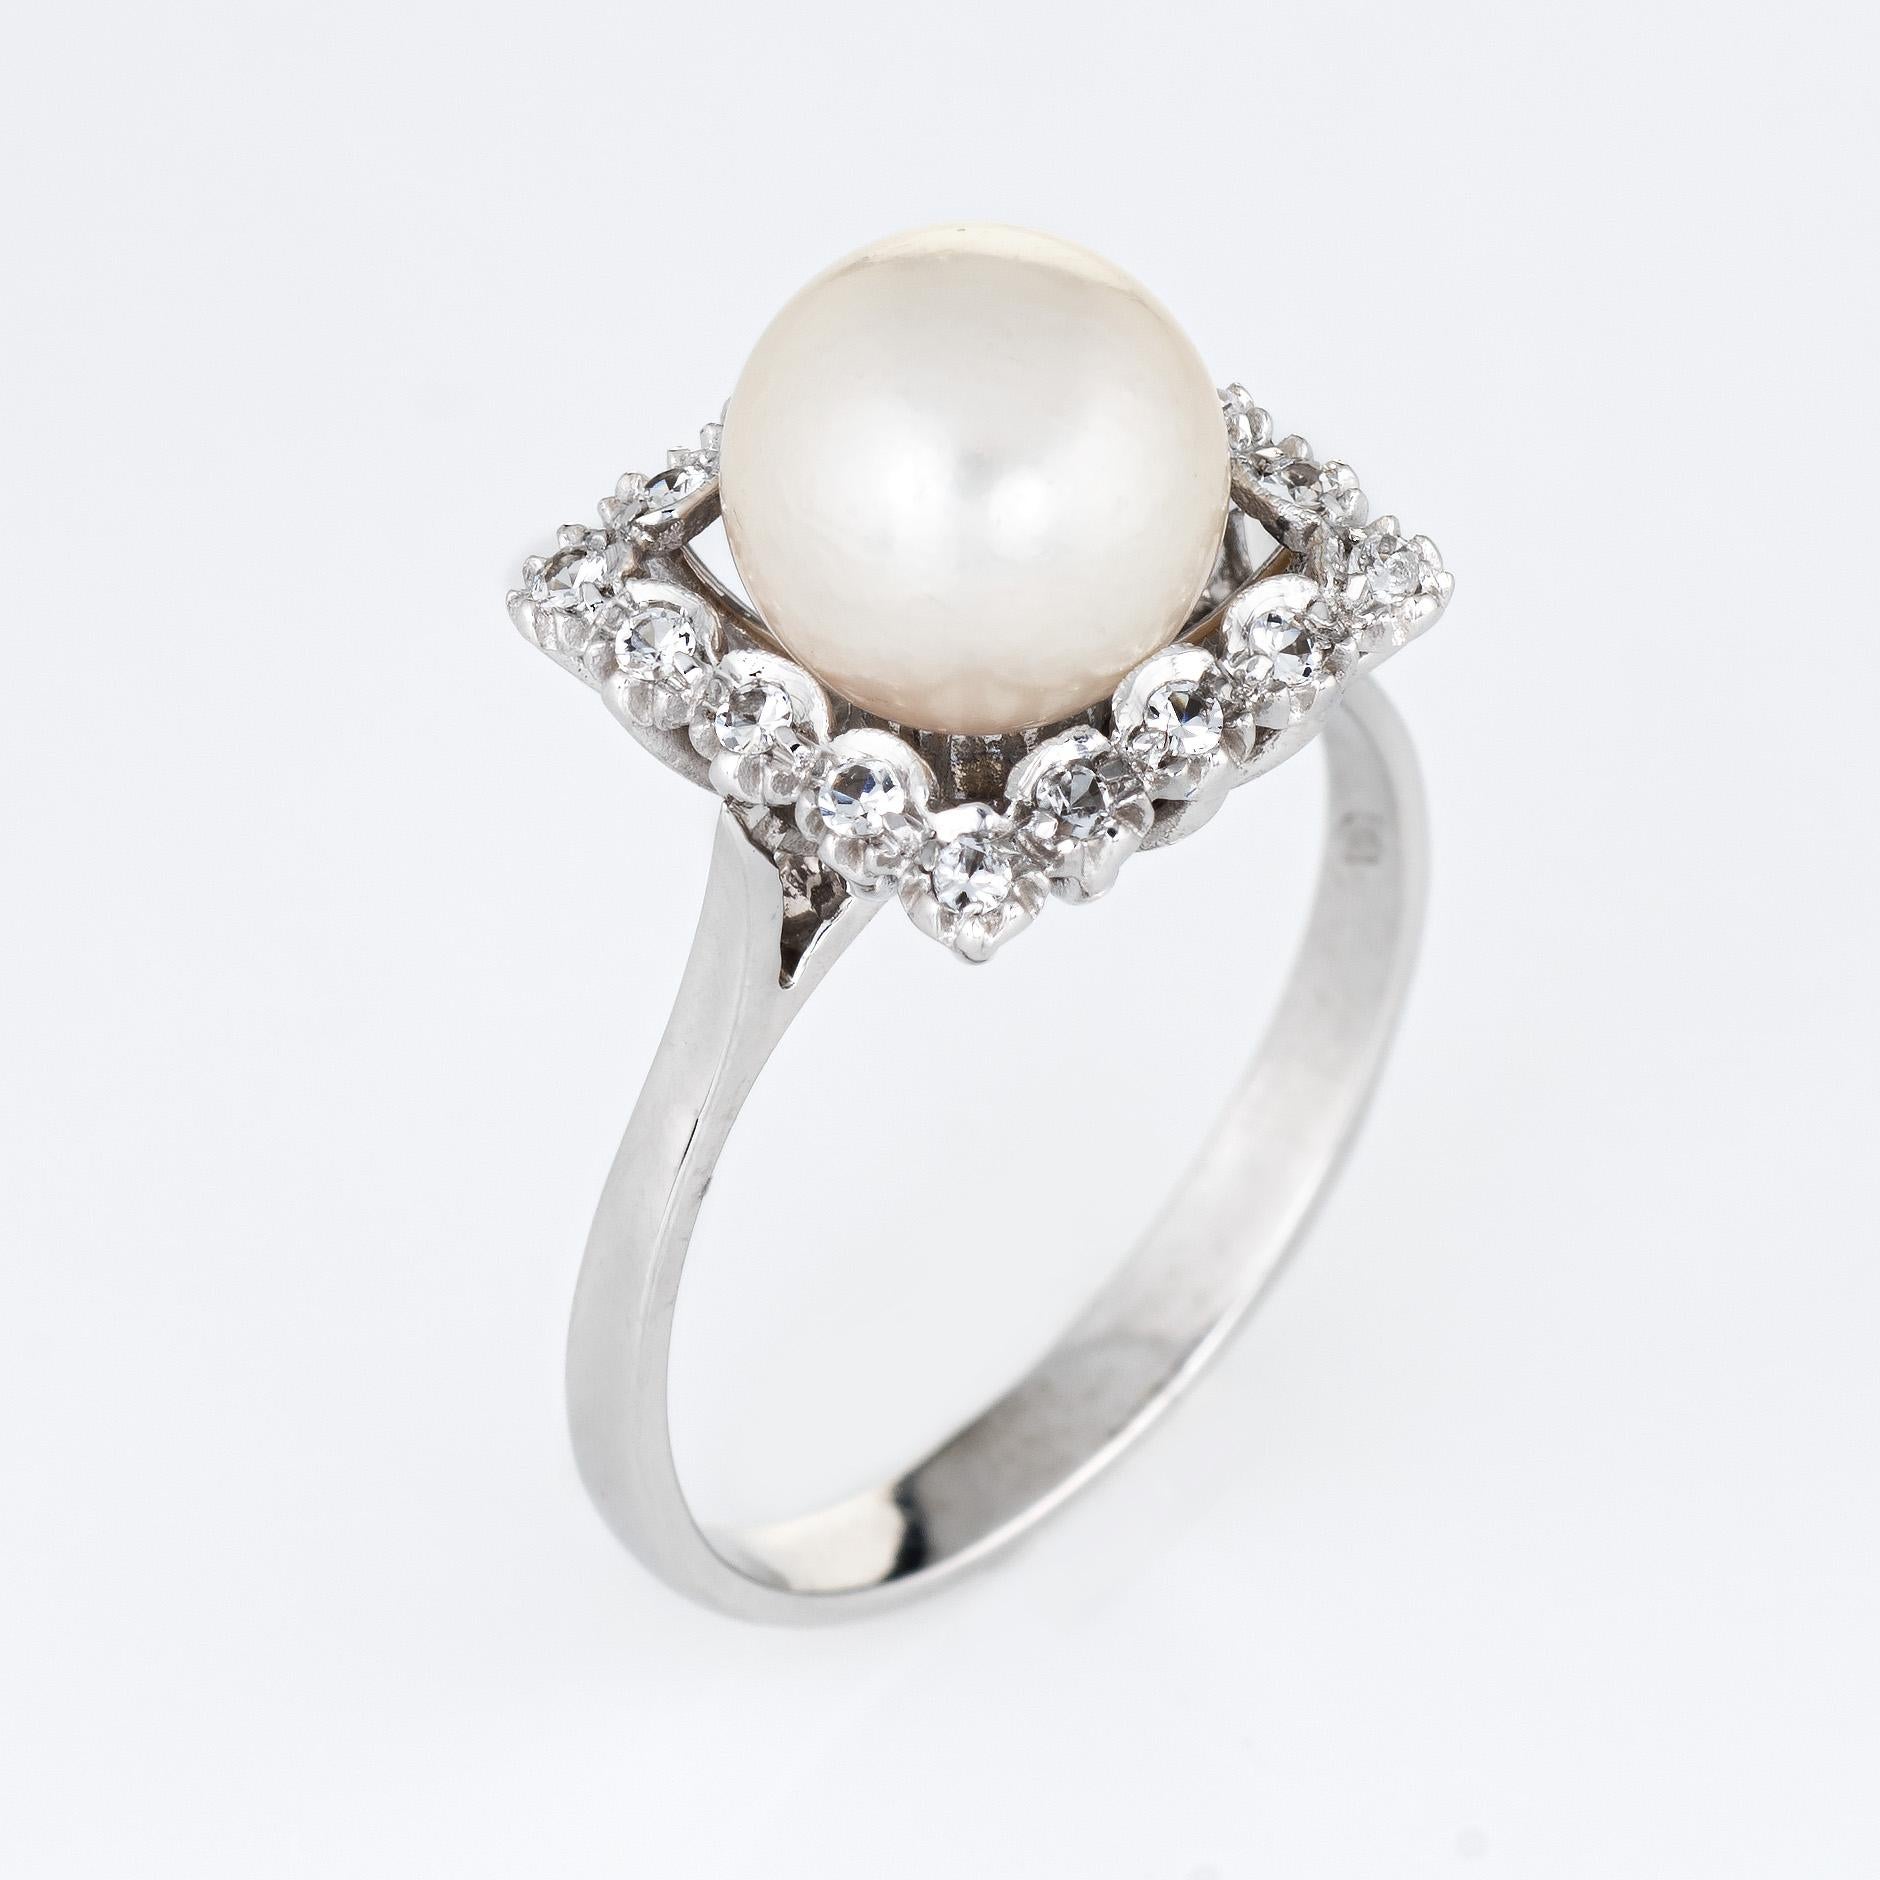 Stylish vintage cultured pearl & diamond ring (circa 1970s to 1980s) crafted in 18 karat white gold. 

The cultured pearl measures 8.5mm, accented with an estimated 0.16 carats (estimated at H-I color and VS2-SI1 clarity).  

The cultured pearl is